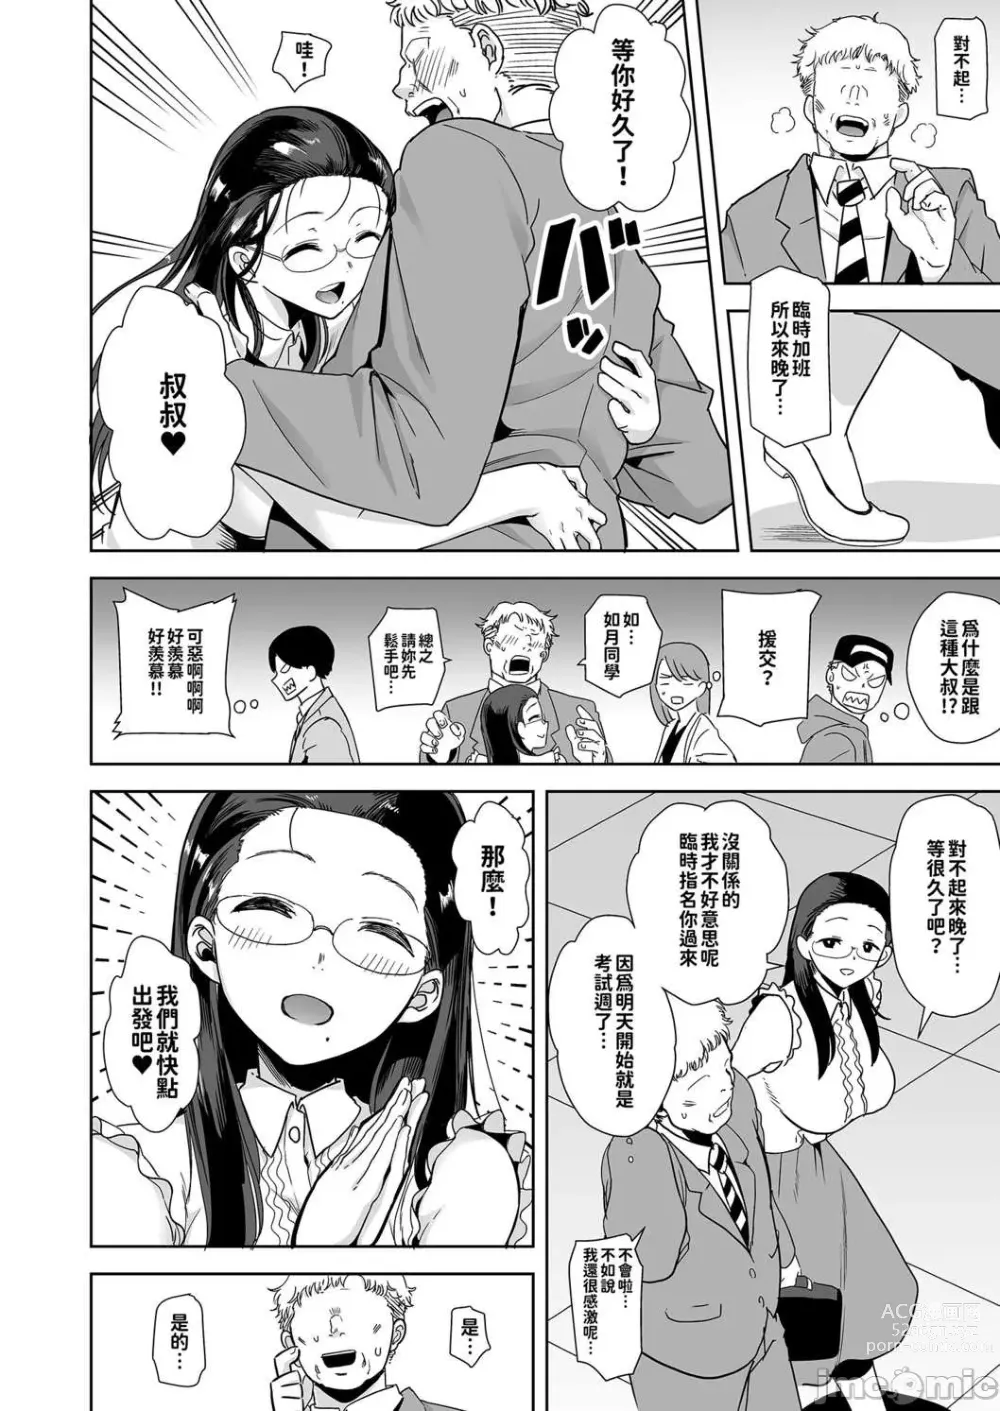 Page 5 of doujinshi 聖華女学院高等部公認竿おじさん 1-6